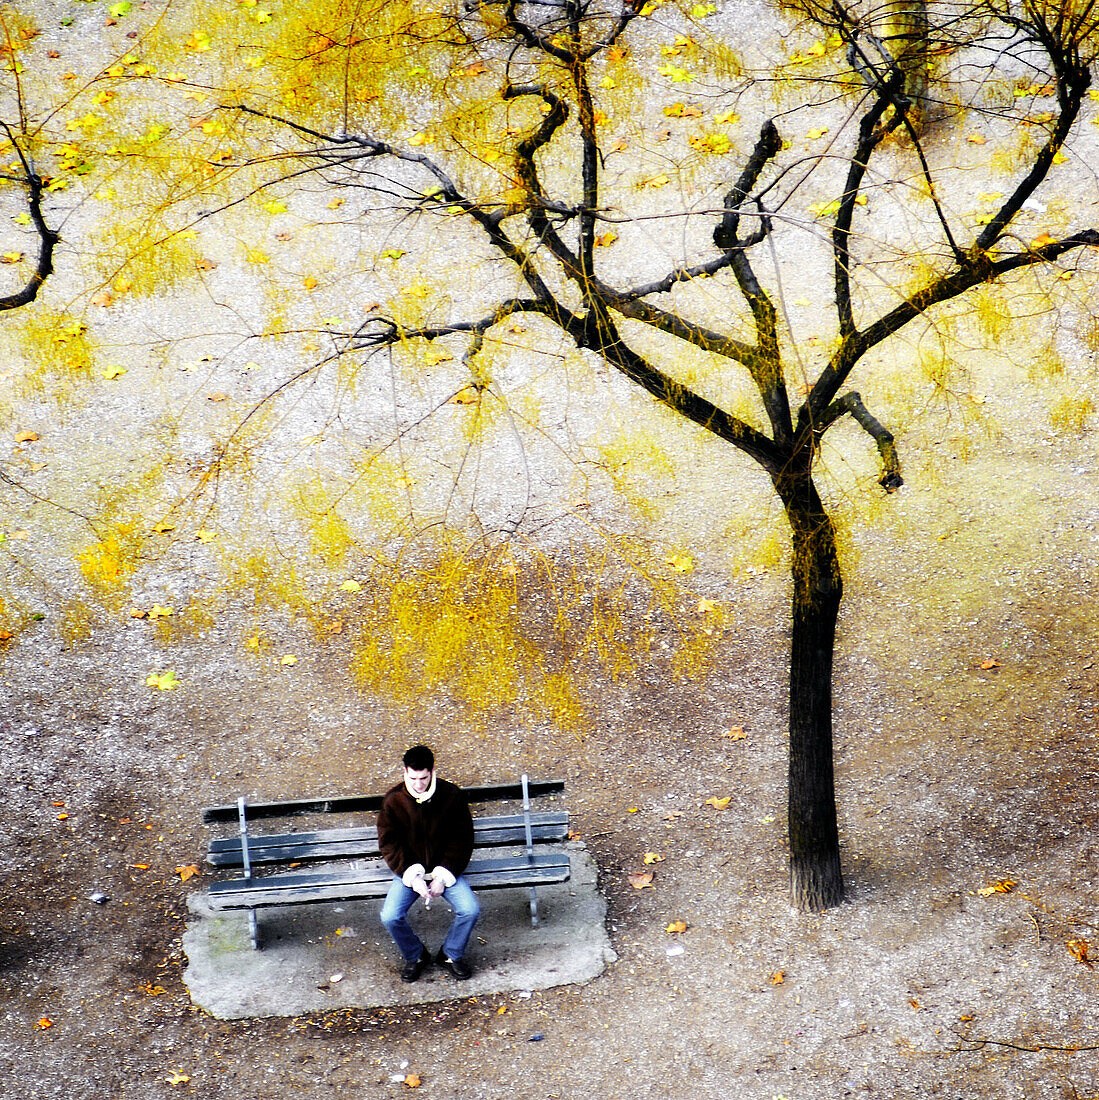 Tree and man waiting on bench viewed from above. Paris. France